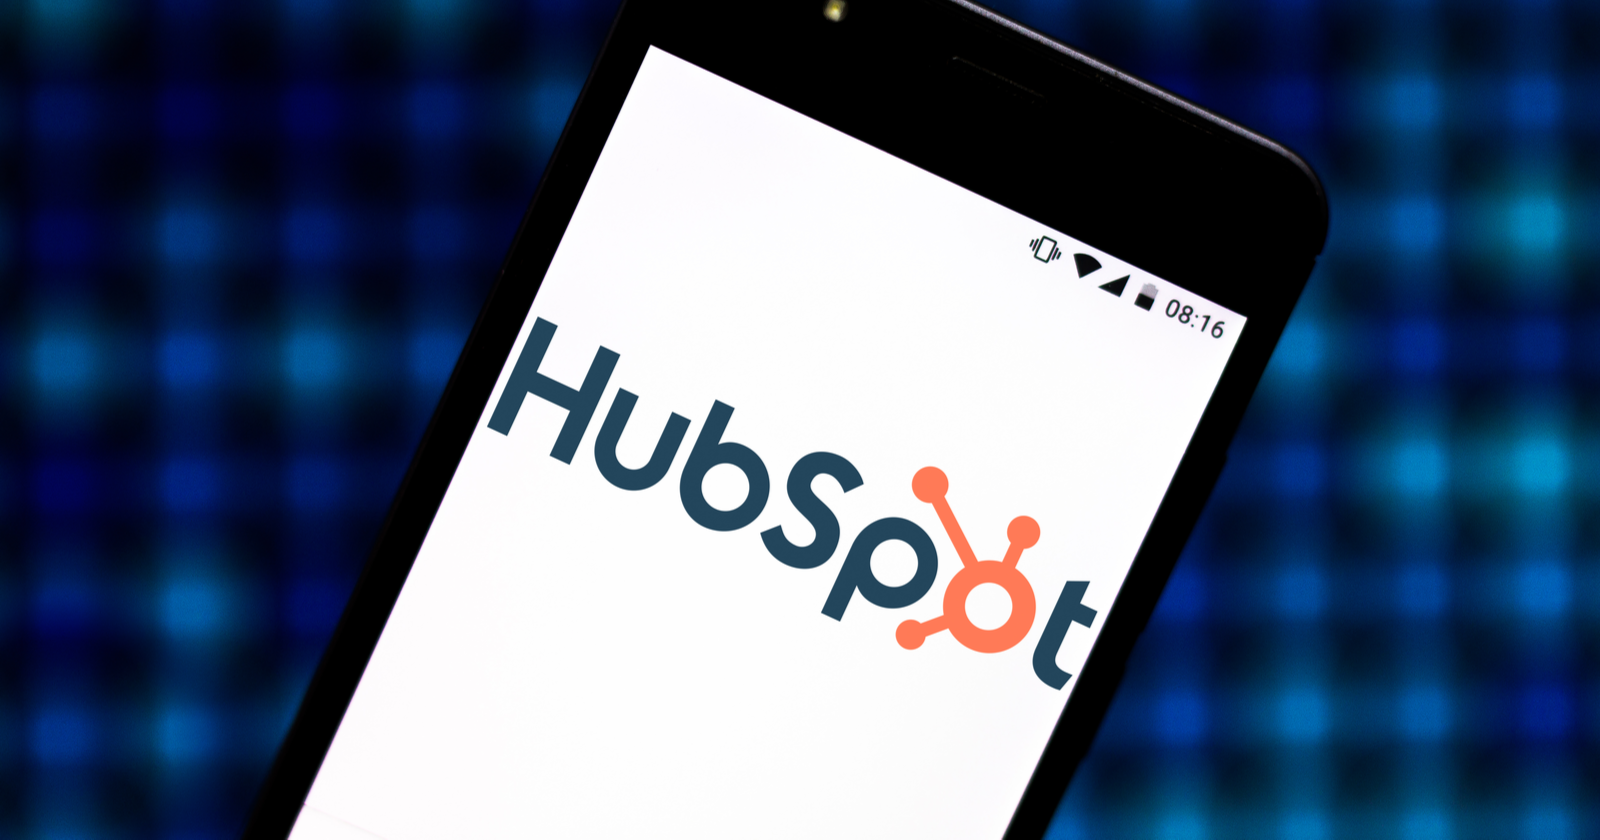 migrating-to-hubspot-cms-an-seo-walkthrough-for-new-users-5f6cb58a36bdb.png